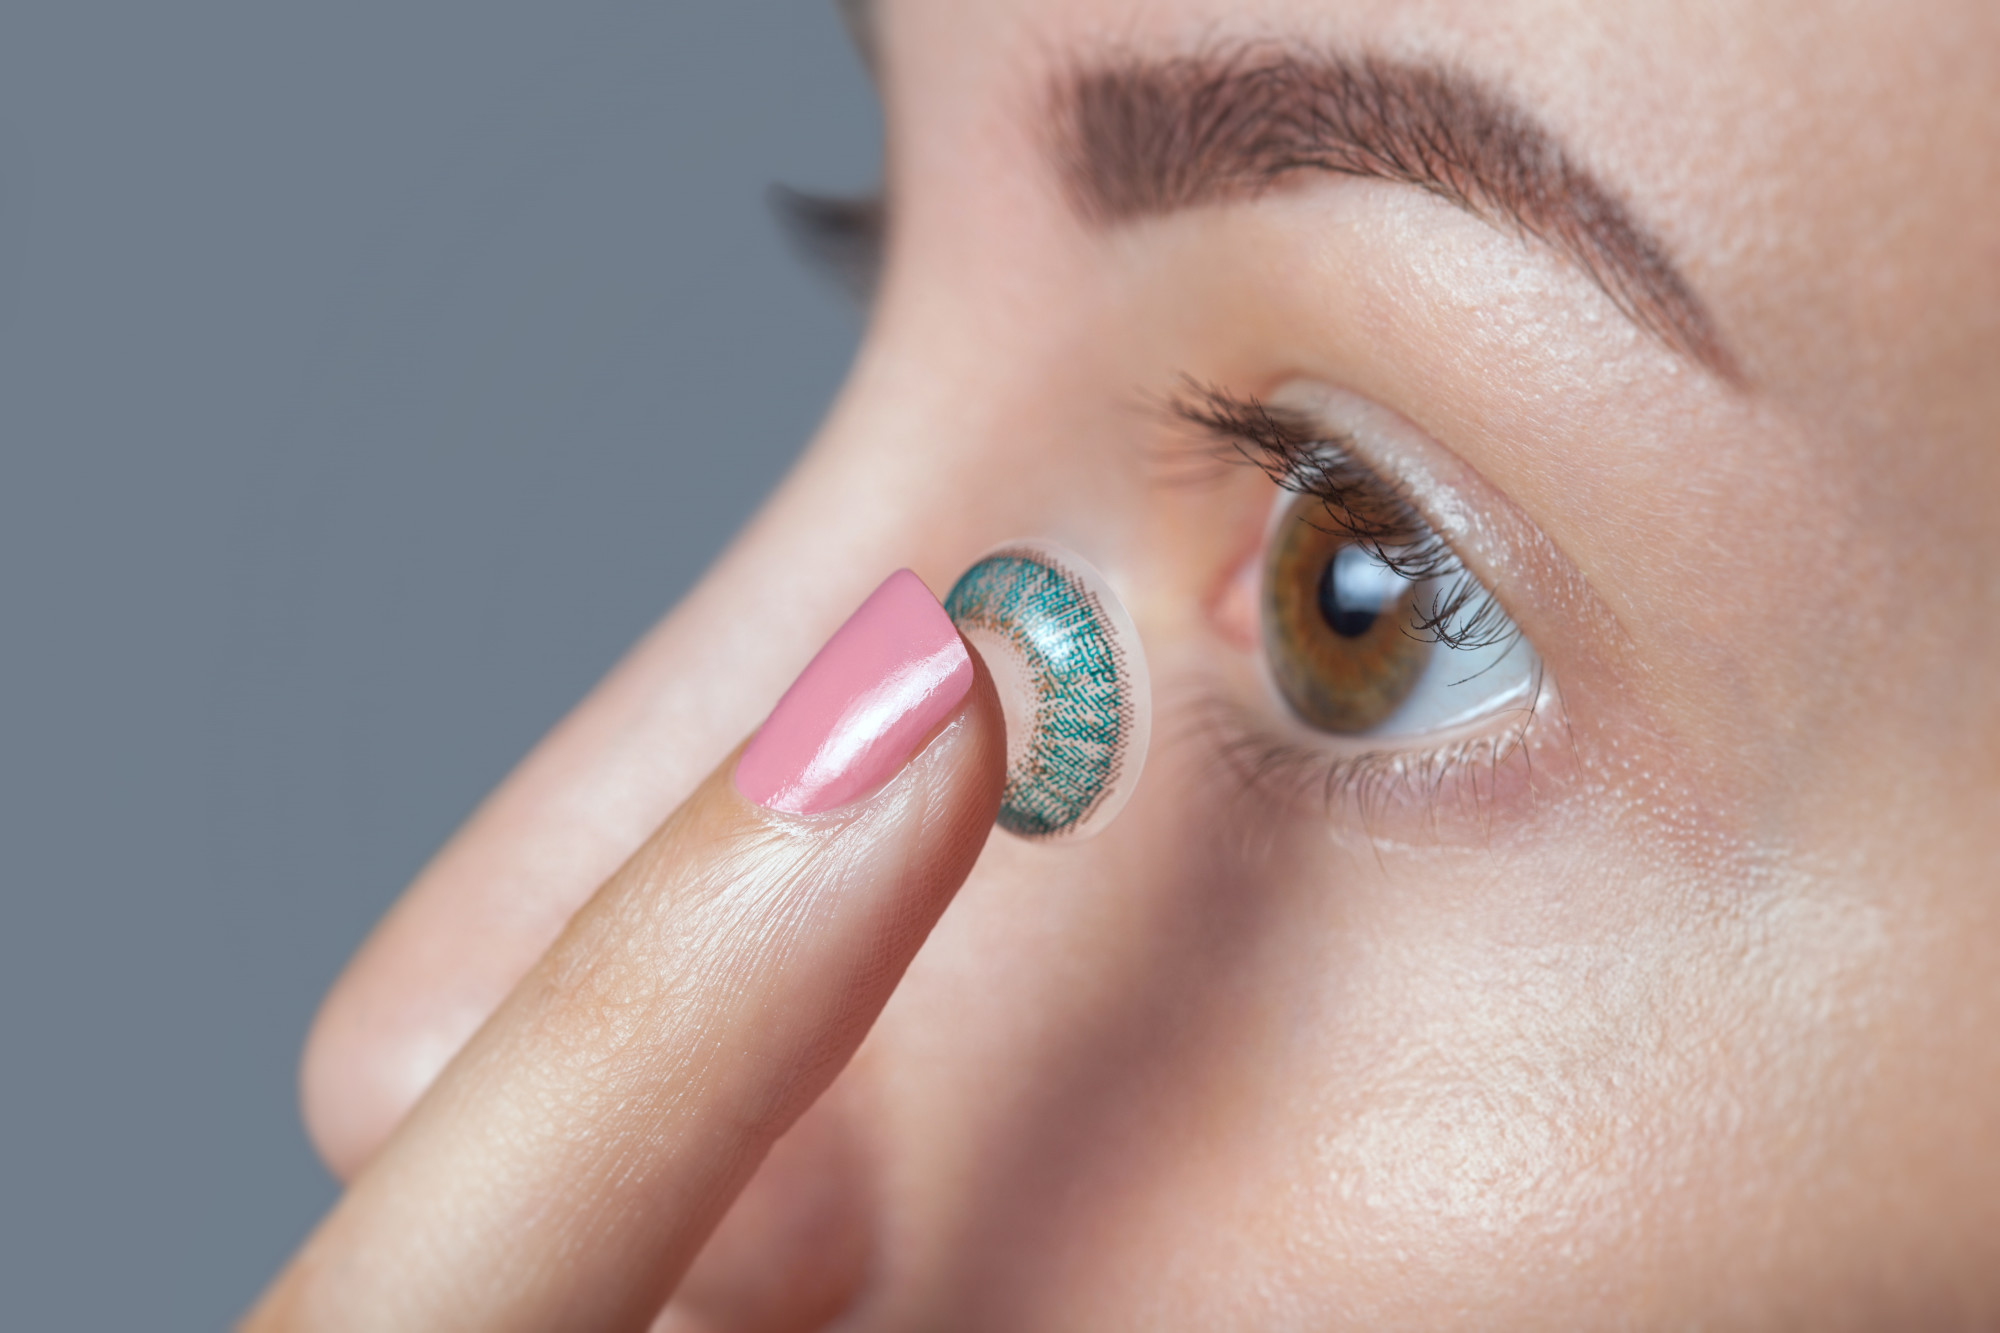 Are you considering getting prescription contact lenses instead of wearing your glasses all the time? Discover 5 benefits of prescription contact lenses.